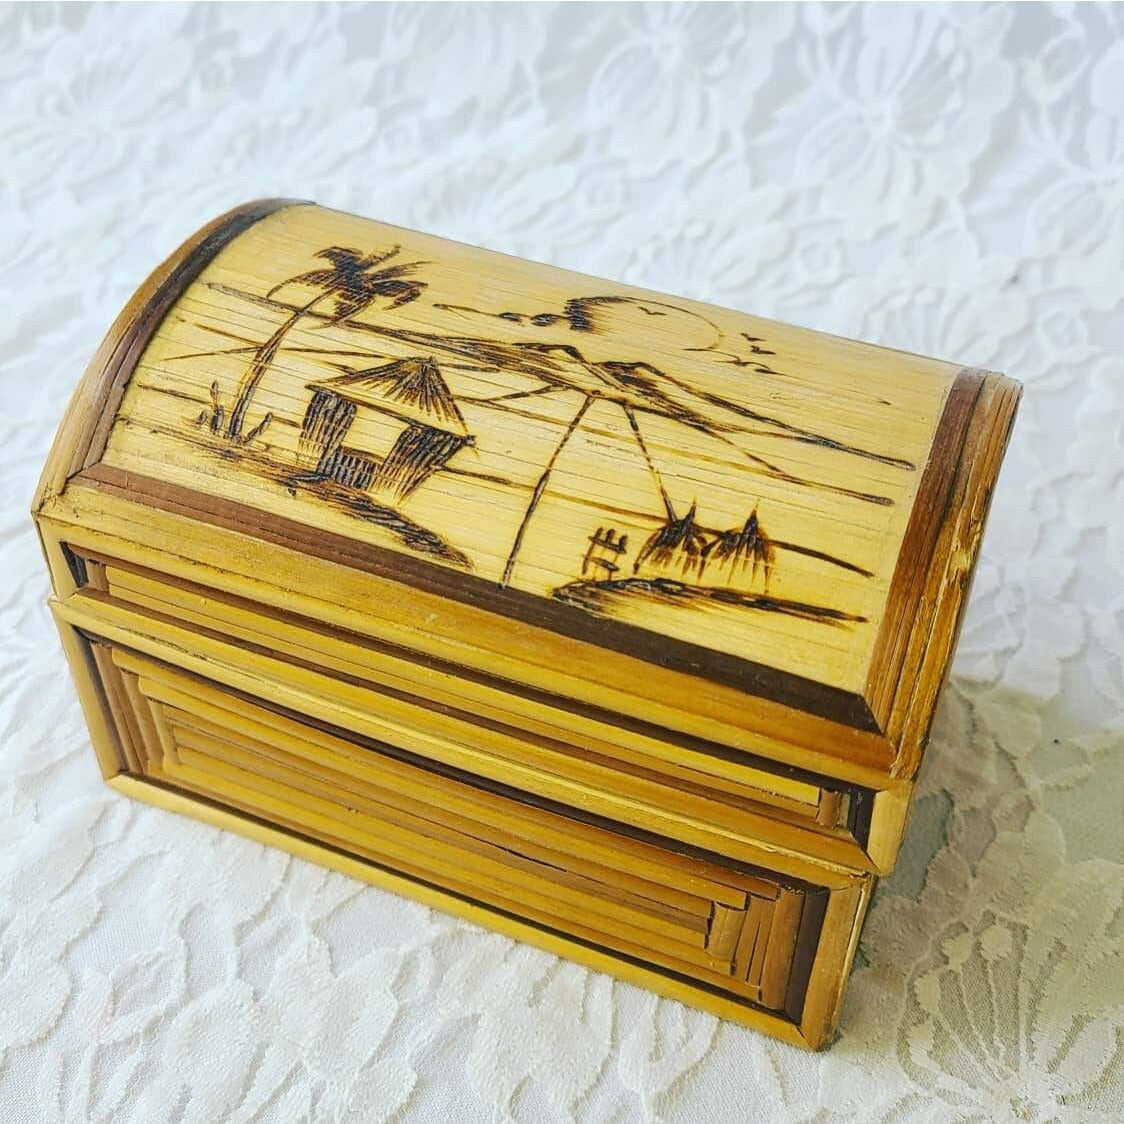 Vintage Hand Painted Indonesian Nesting Bamboo Boxes ~ Intricate Wood Burning Design ~ Red Velvet Inside